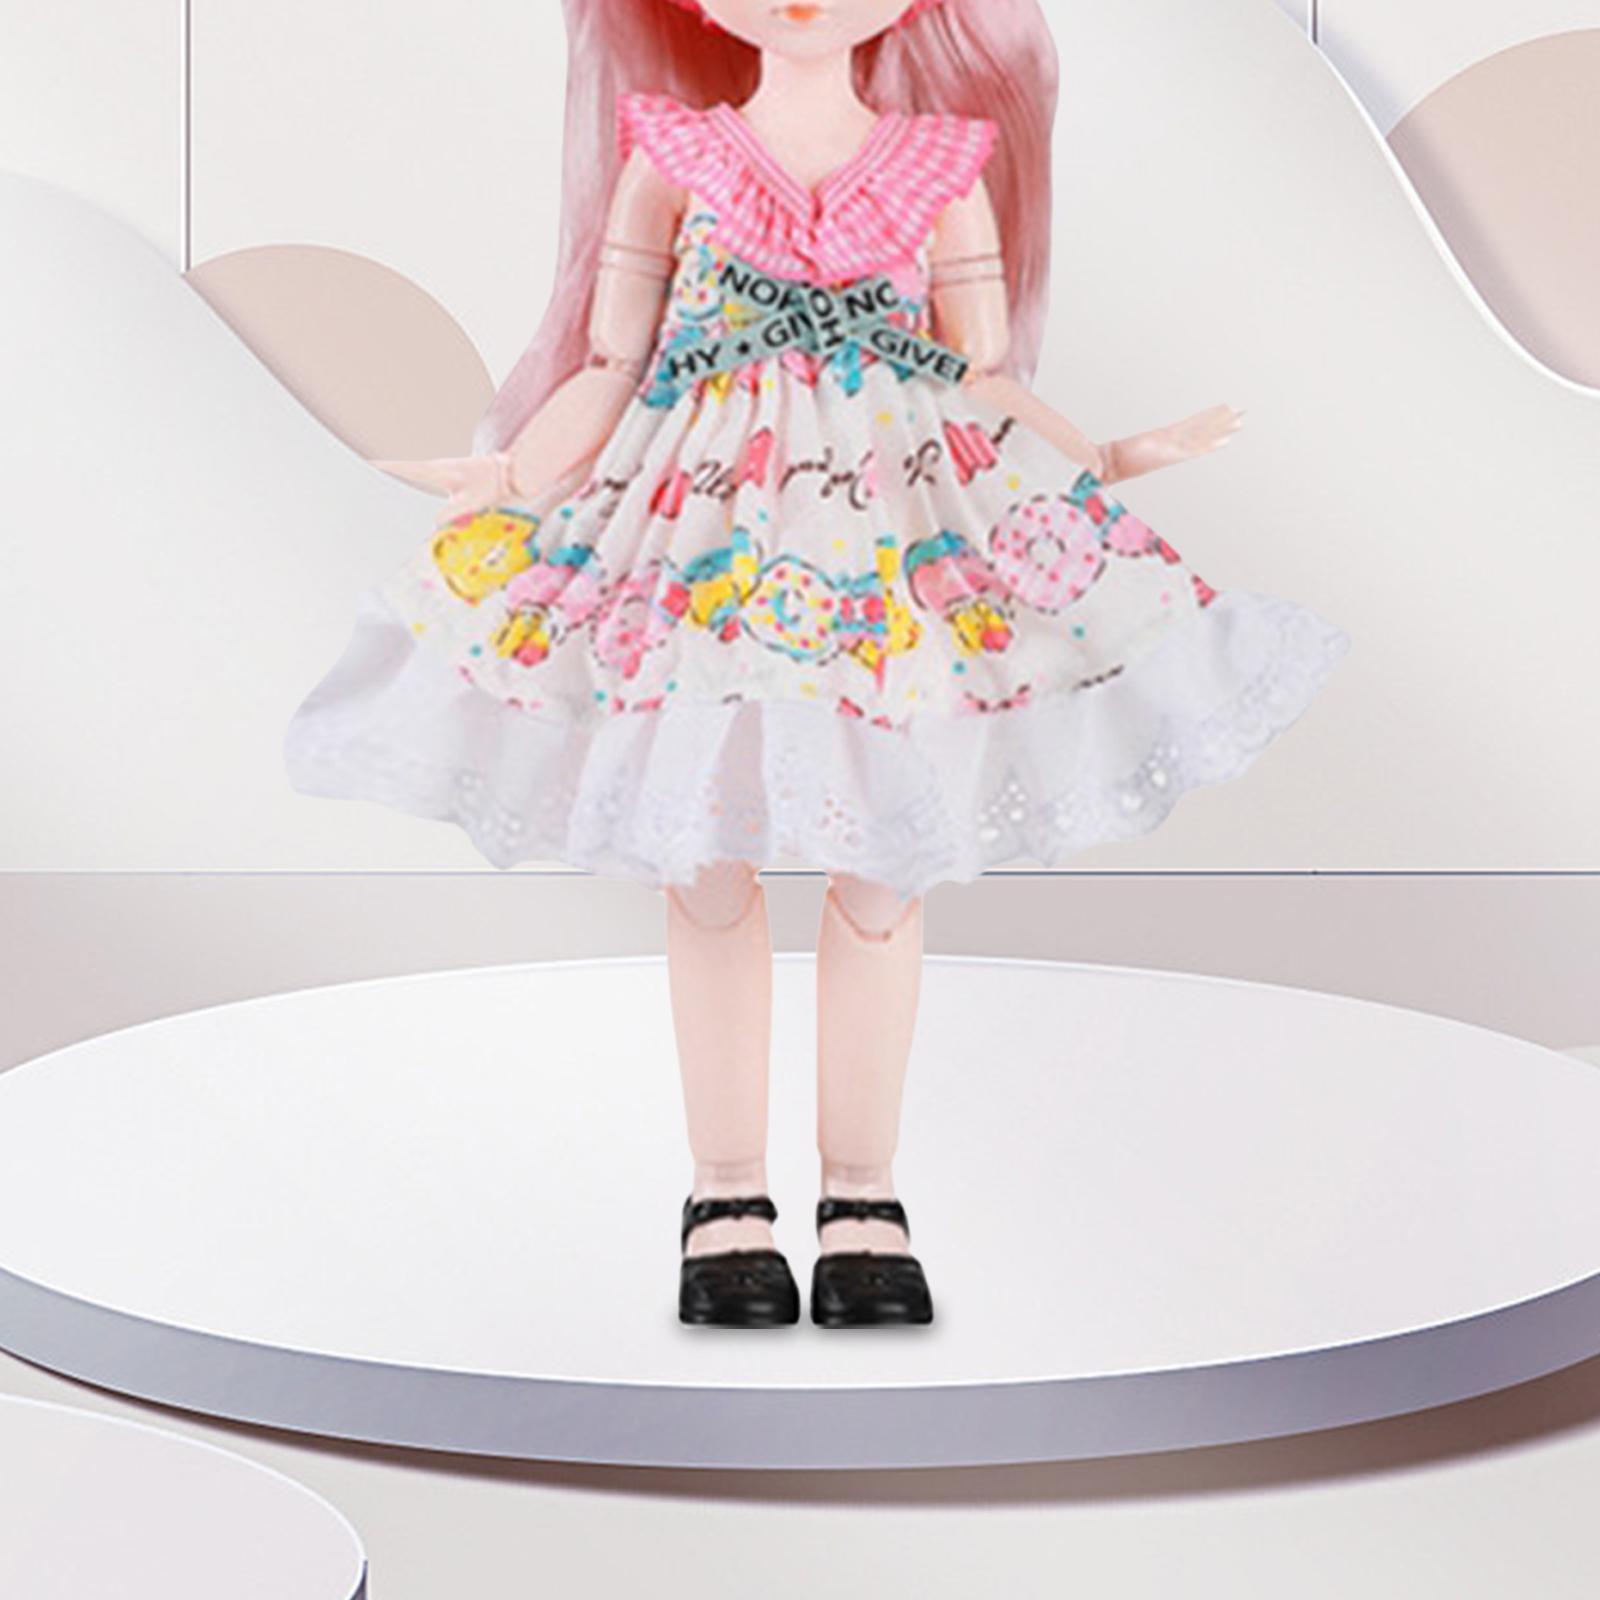 Fashion Doll Clothes Dress Set Daily Wear  Doll Changing Clothes for 30cm Doll for